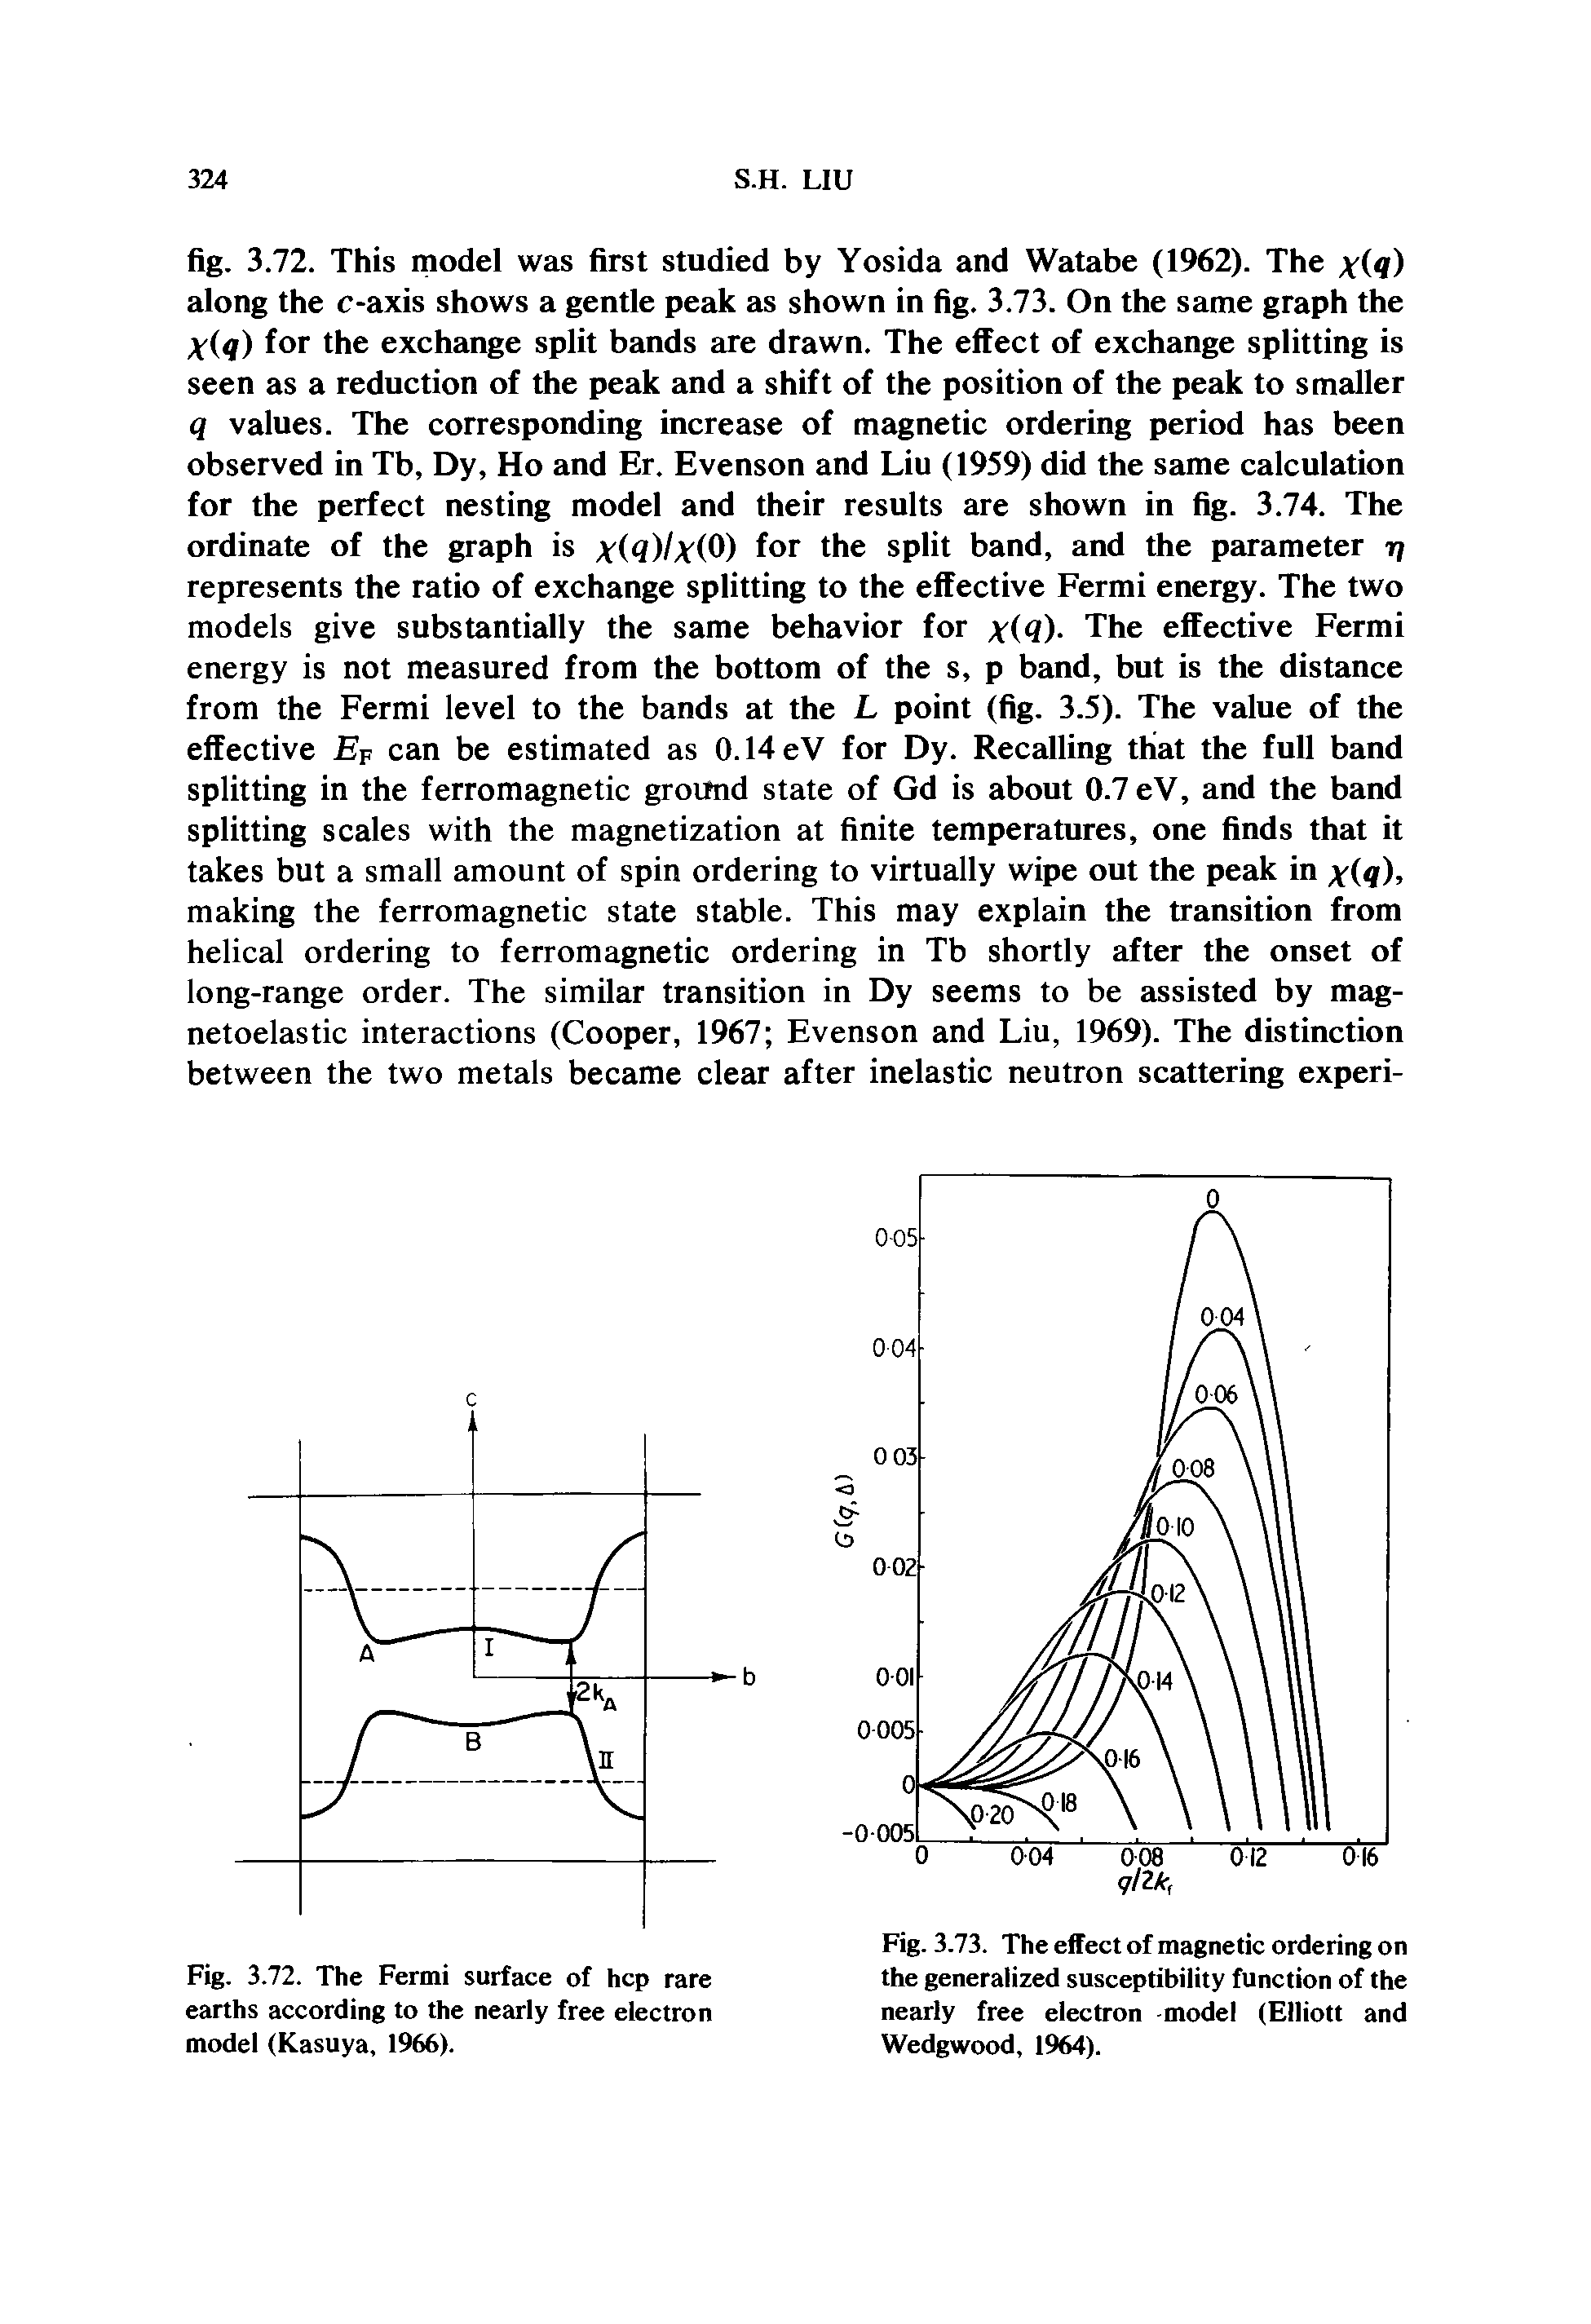 Fig. 3.72. The Fermi surface of hep rare earths according to the nearly free electron model (Kasuya, 1966).